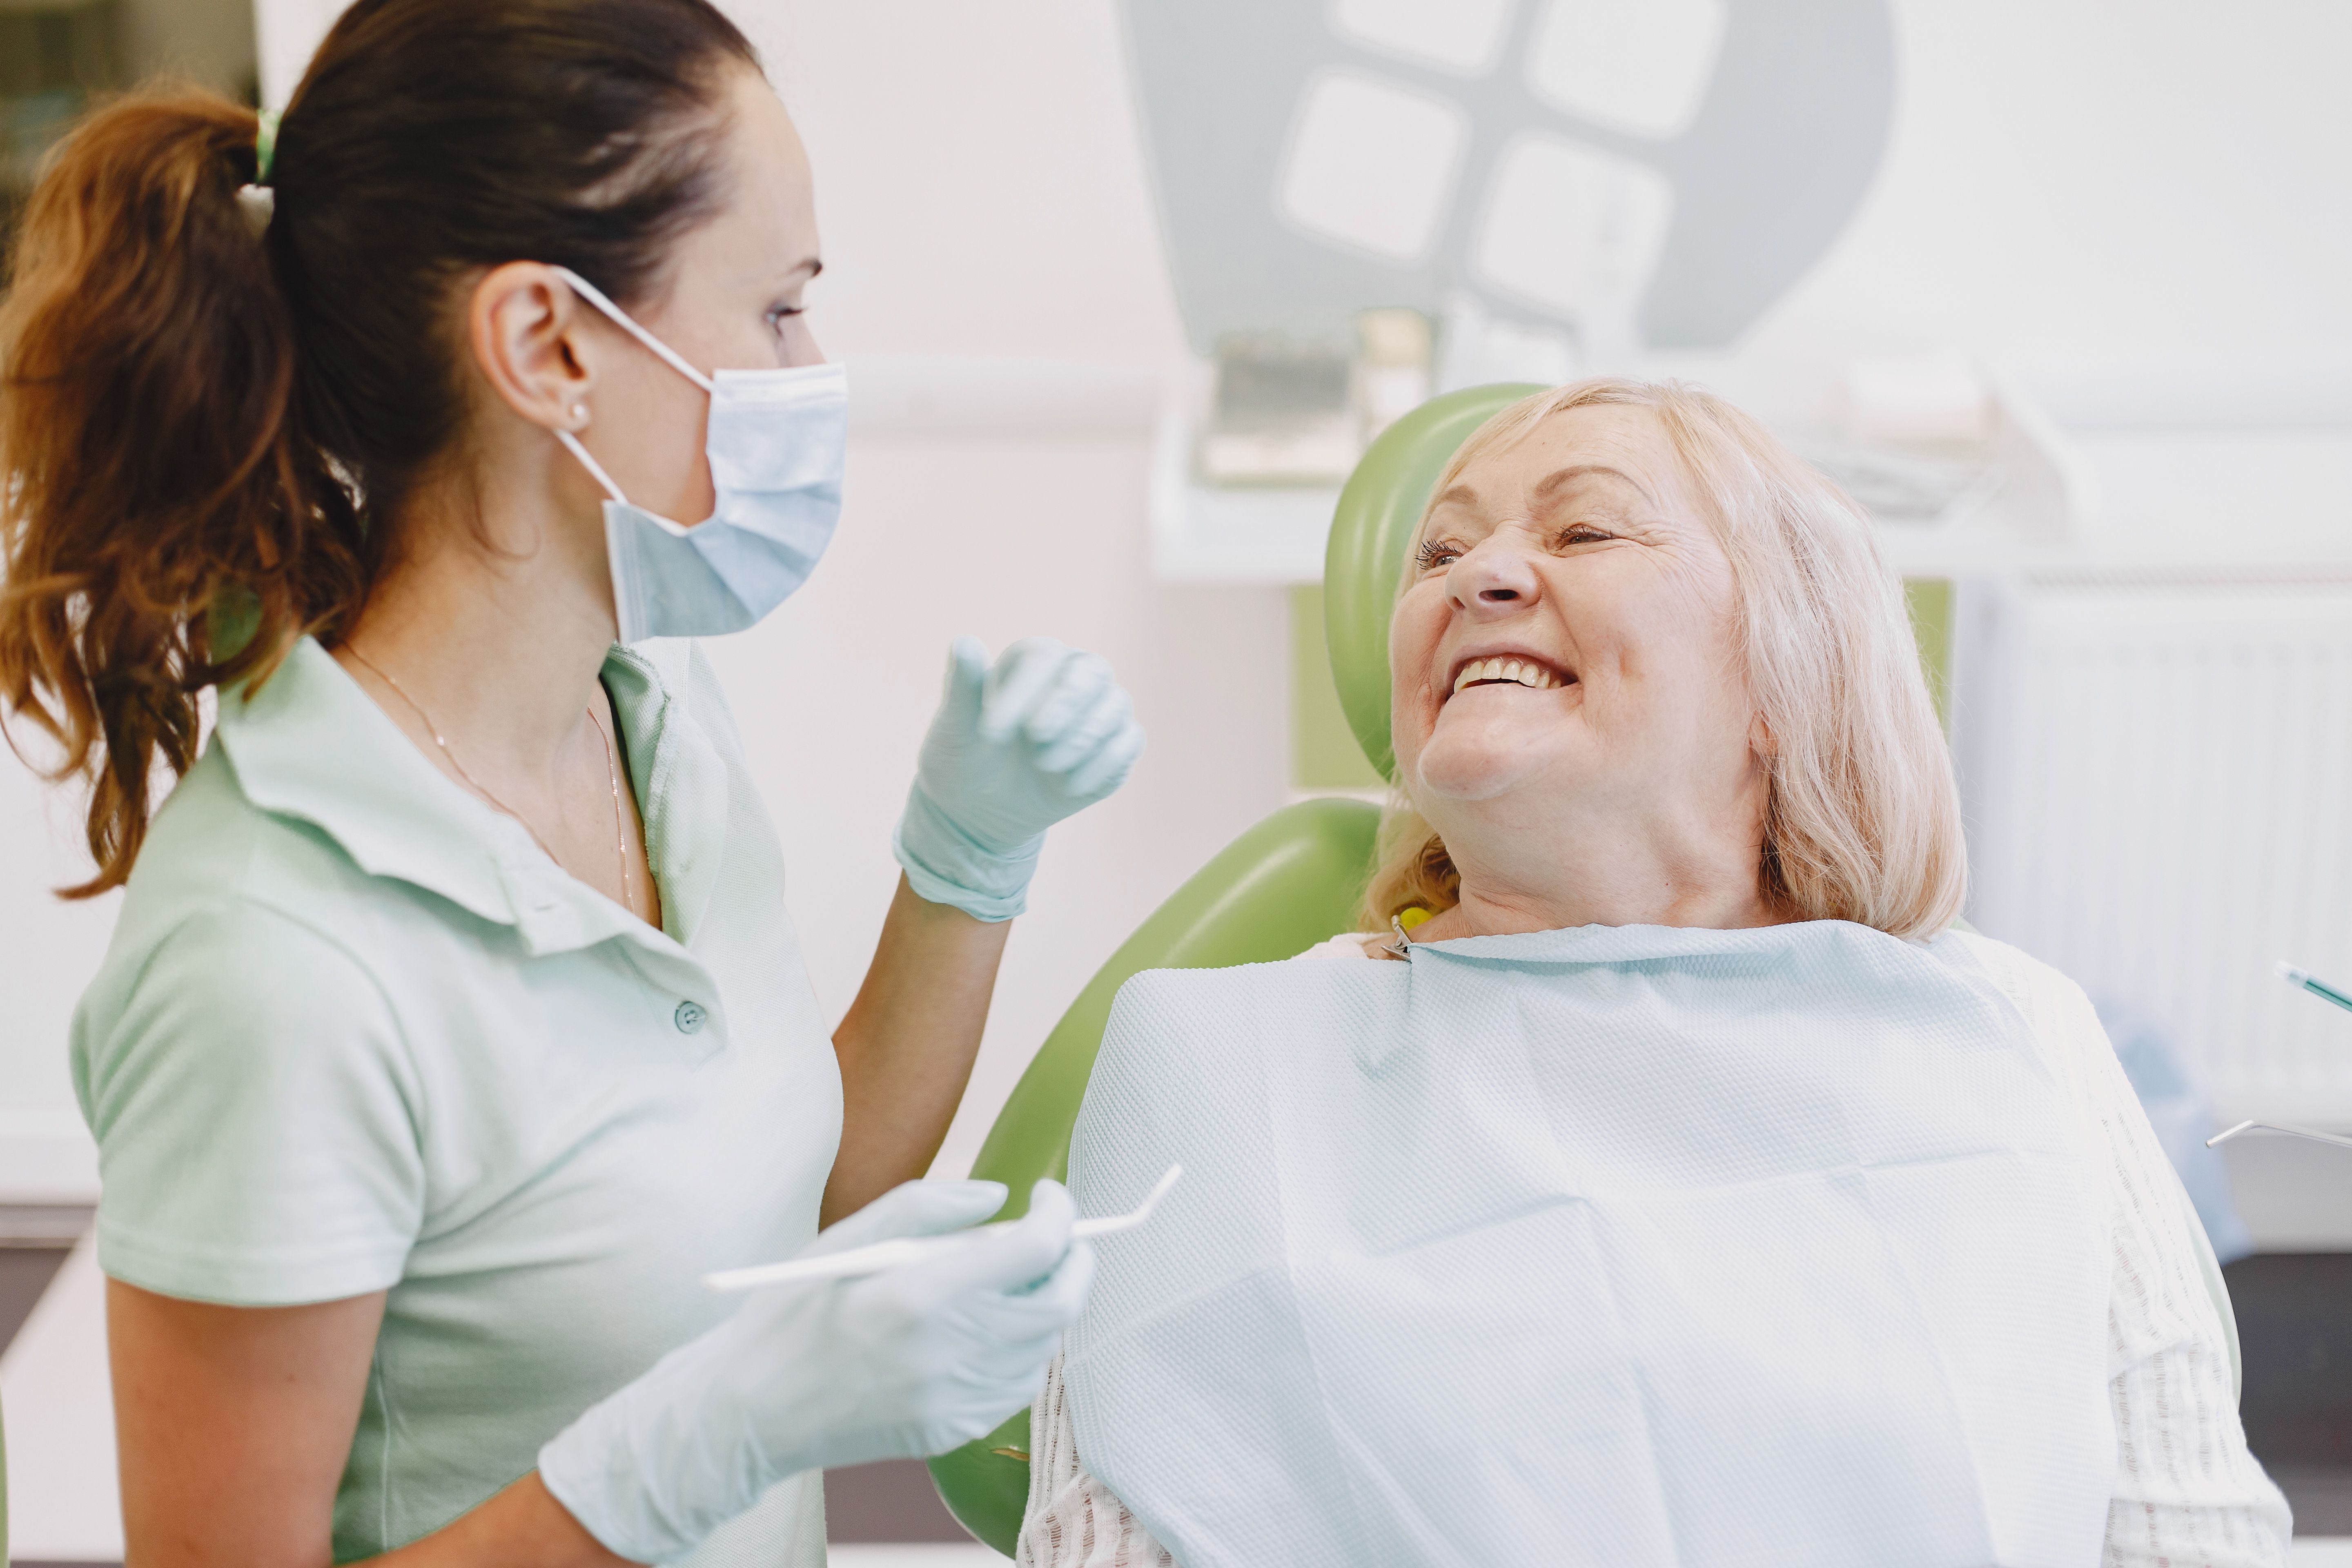 Elderly Dental Care: Tips and Special Considerations